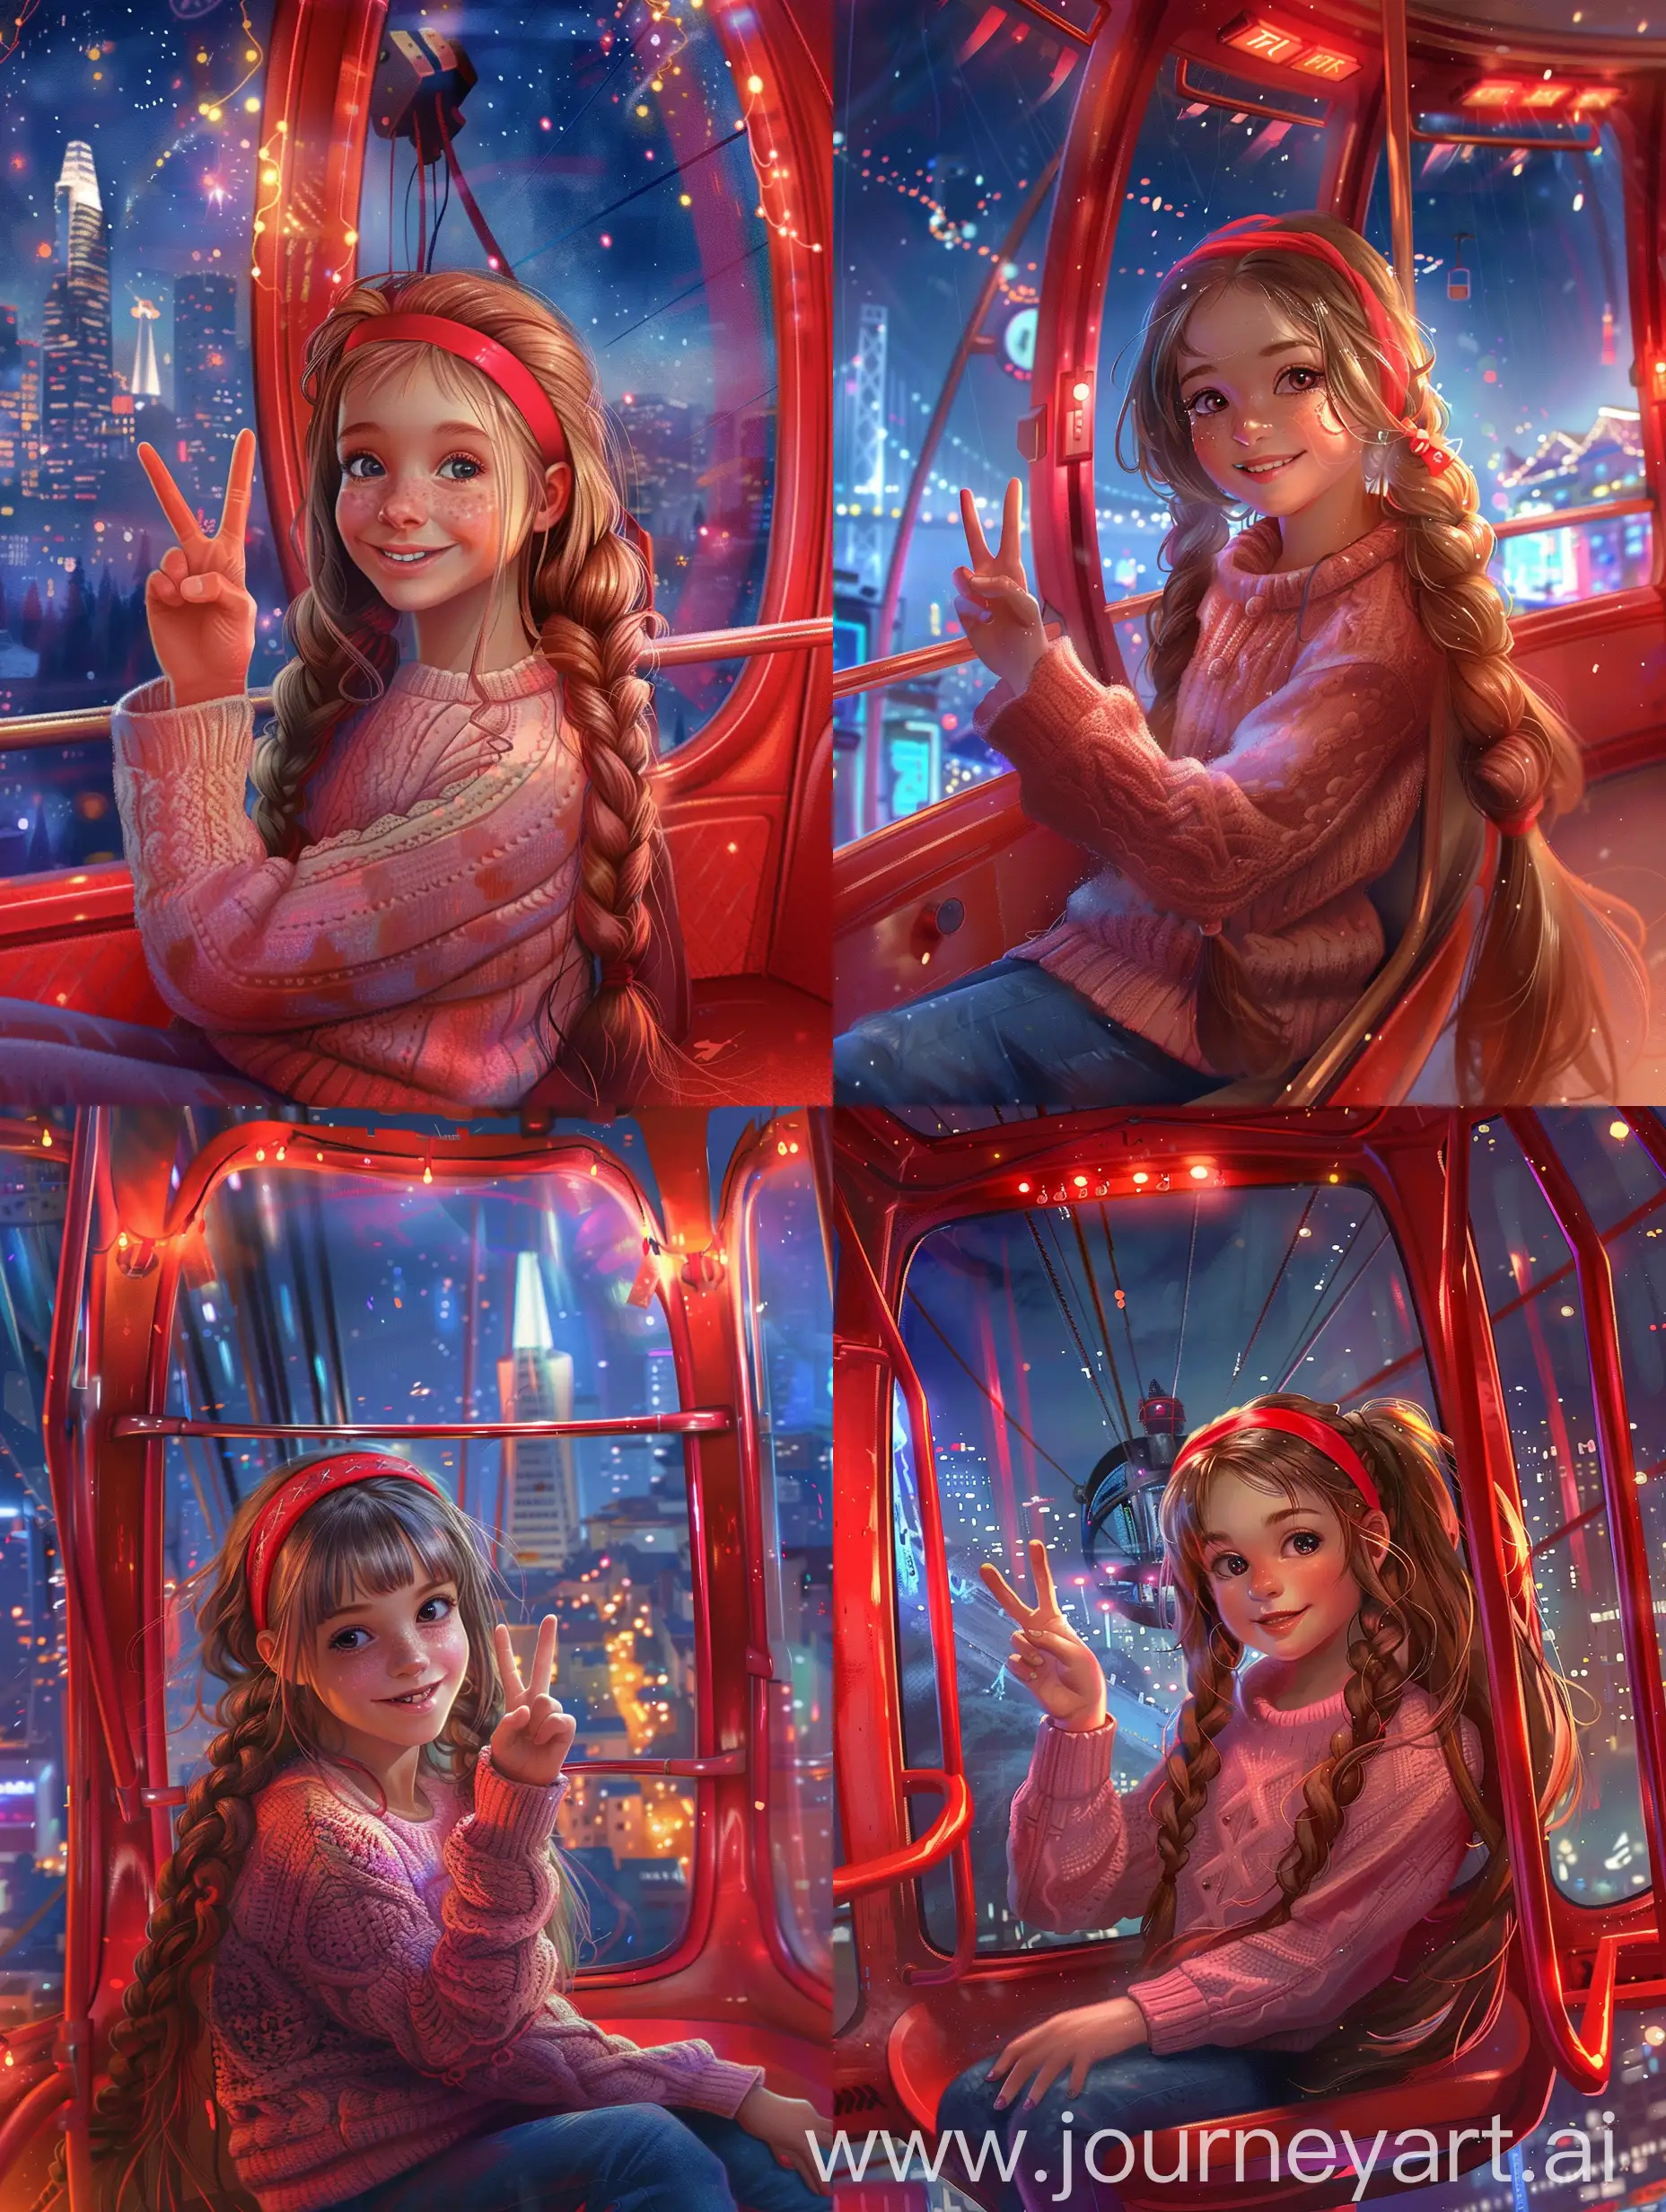 Joyful-Young-Girl-in-Pink-Sweater-Making-Peace-Sign-in-Bright-Cable-Car-Overlooking-Night-Cityscape